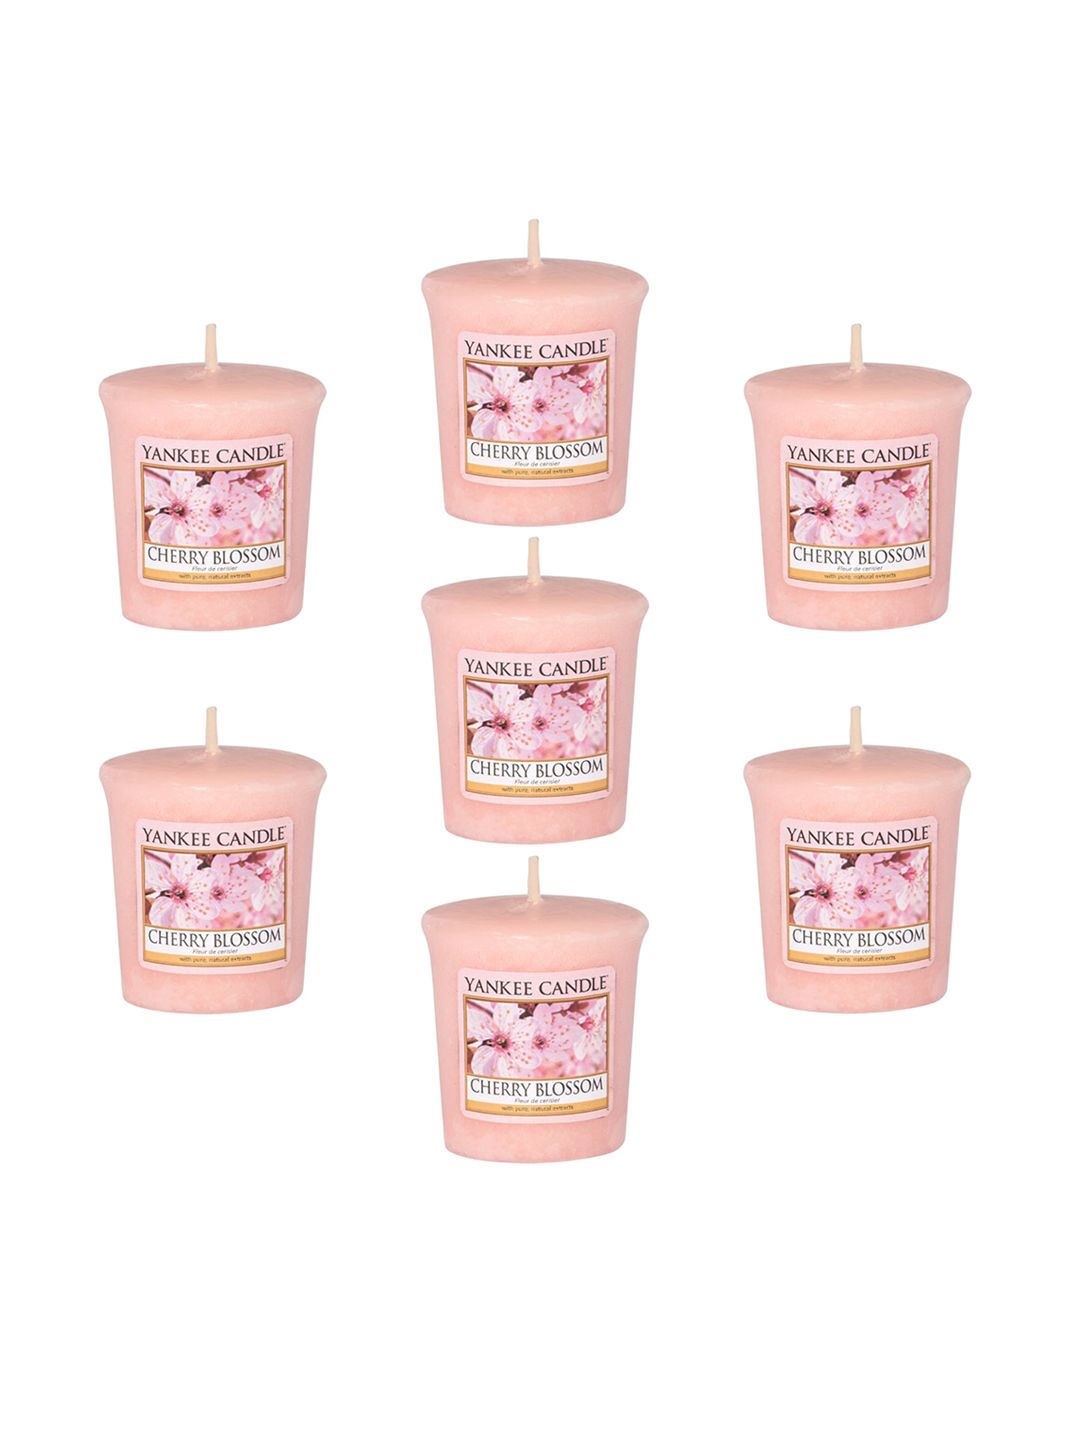 YANKEE CANDLE Set Of 7 Classic Votive Cherry Blossom Scented Candles Price in India